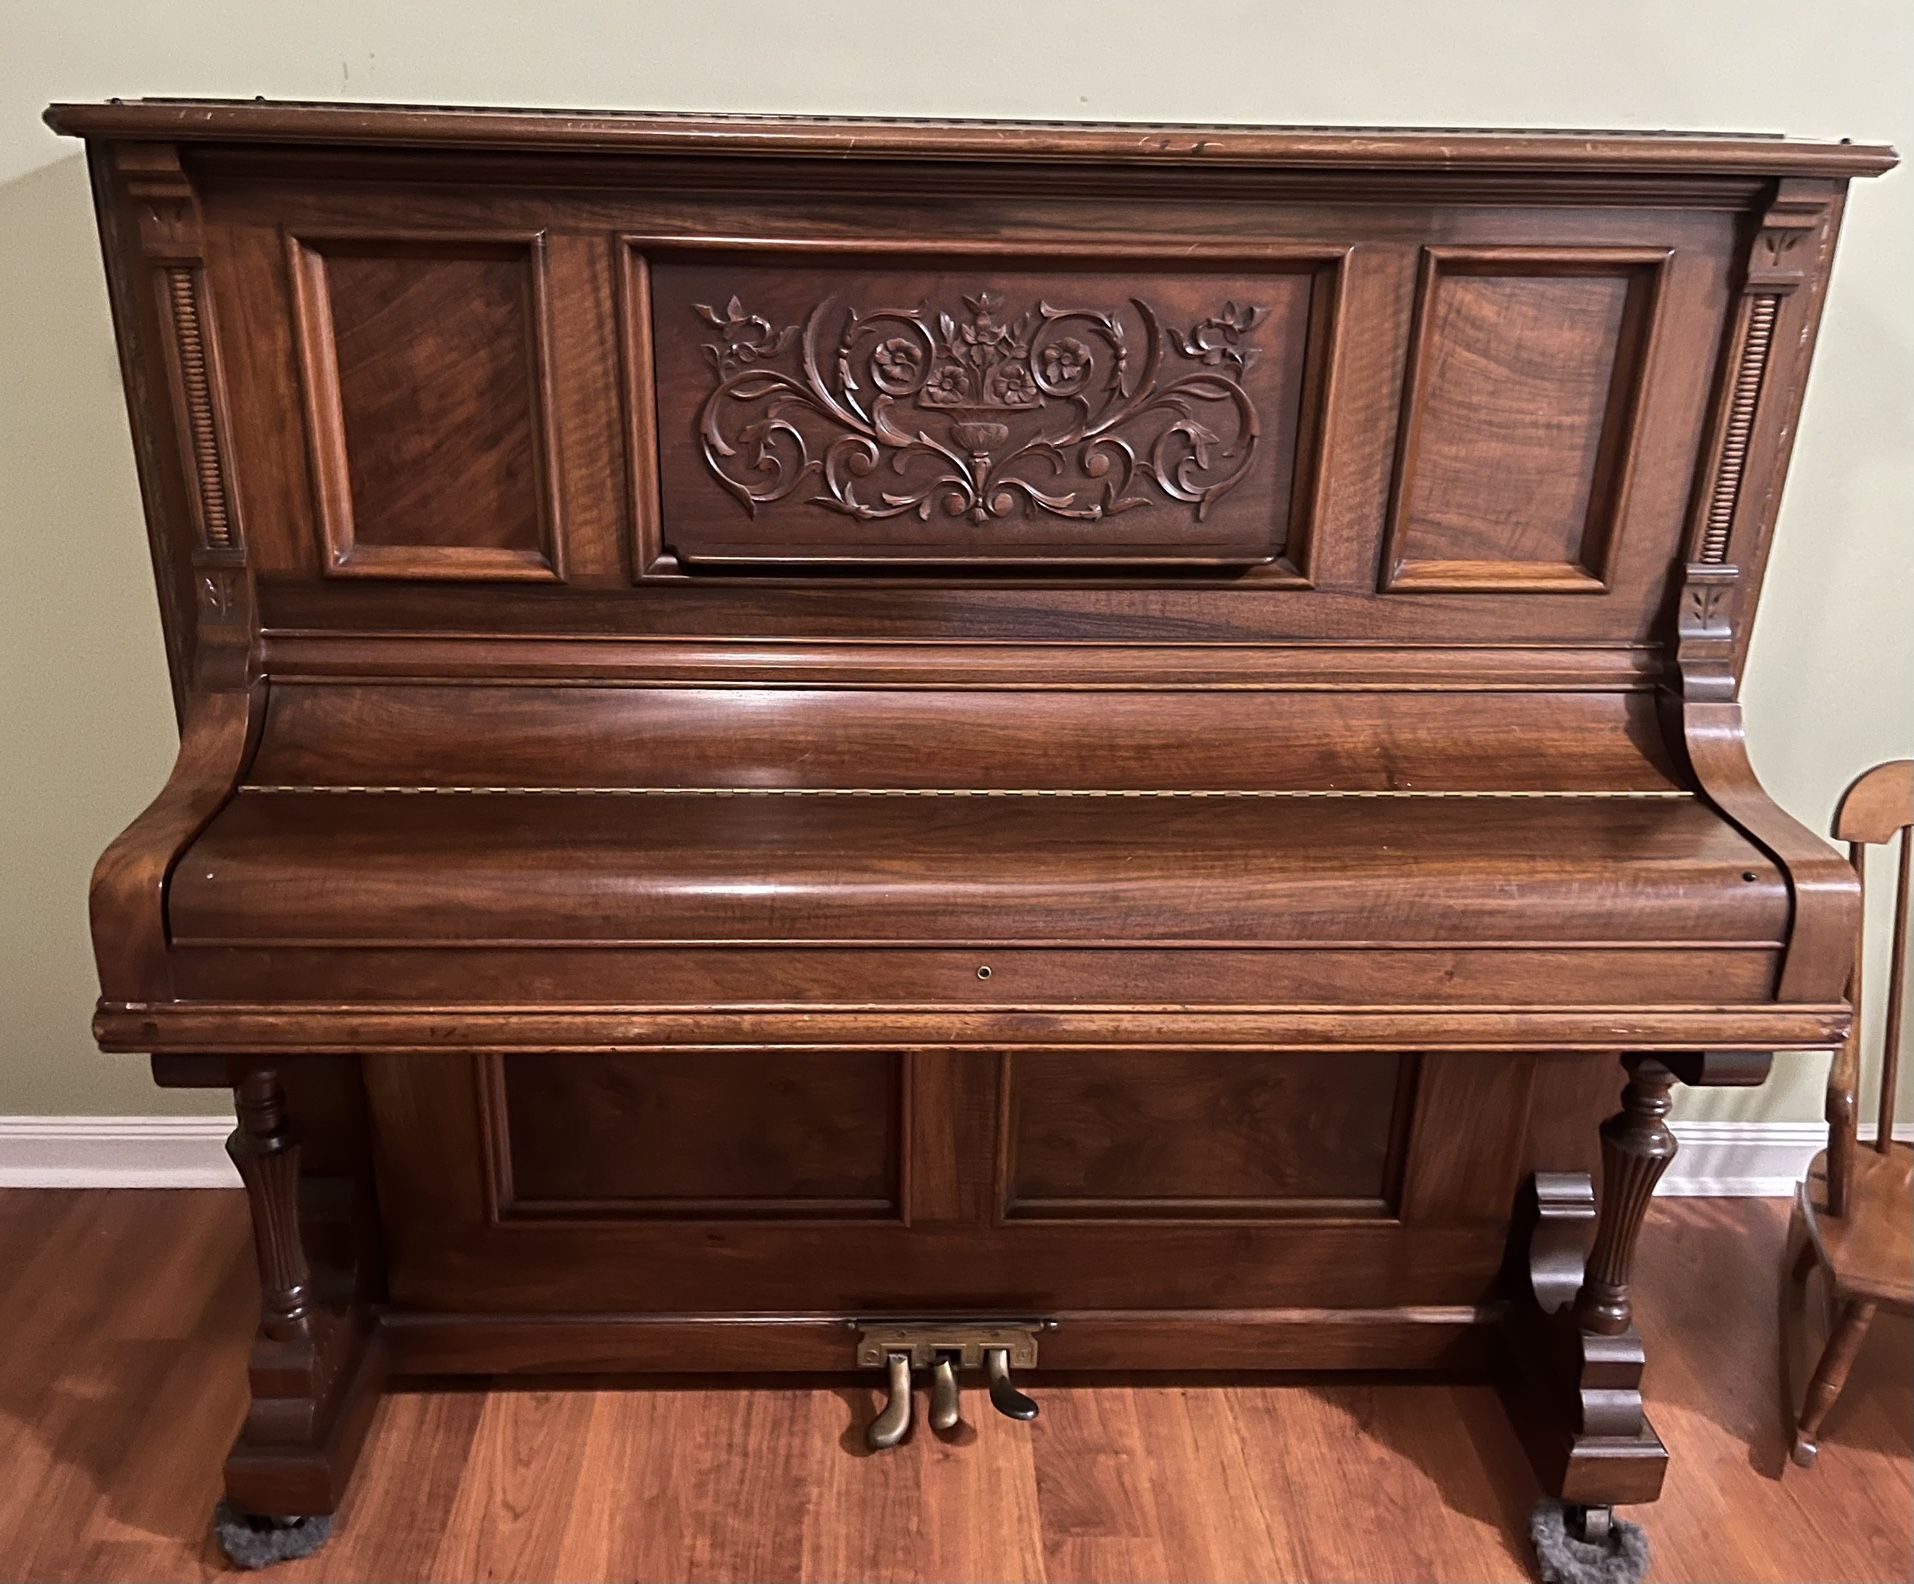 Stirling Upright Piano (1902)